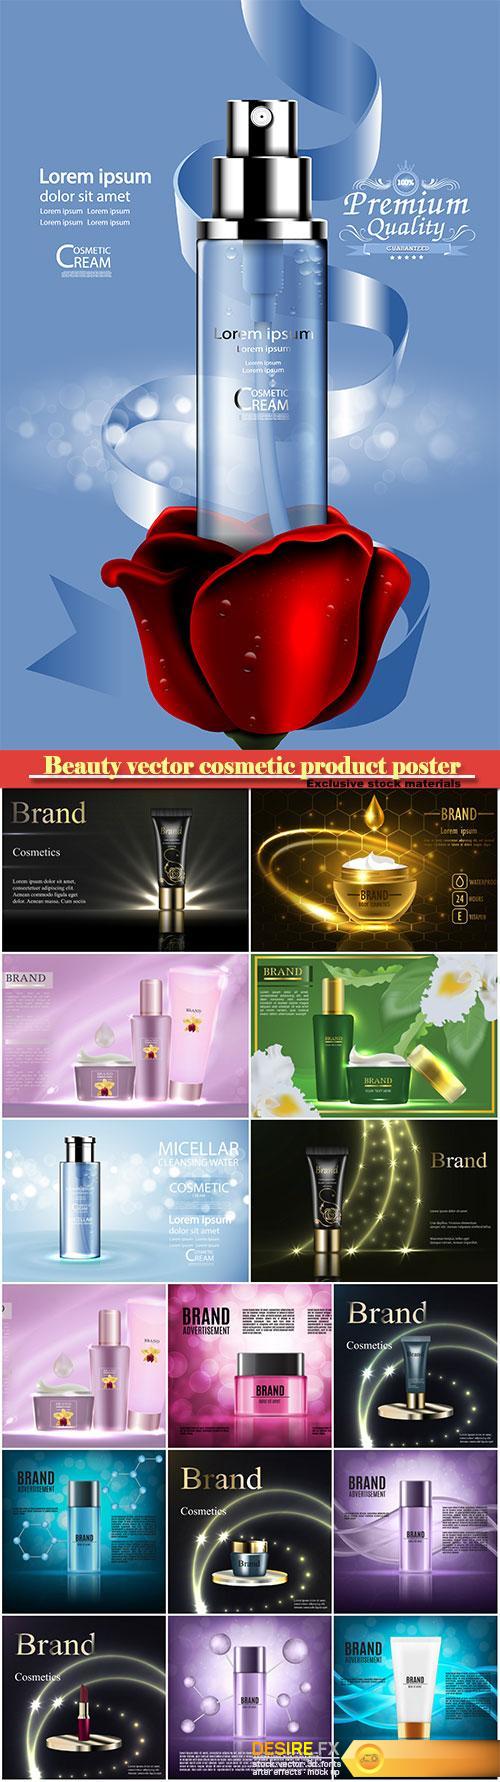 Beauty vector cosmetic product poster # 16